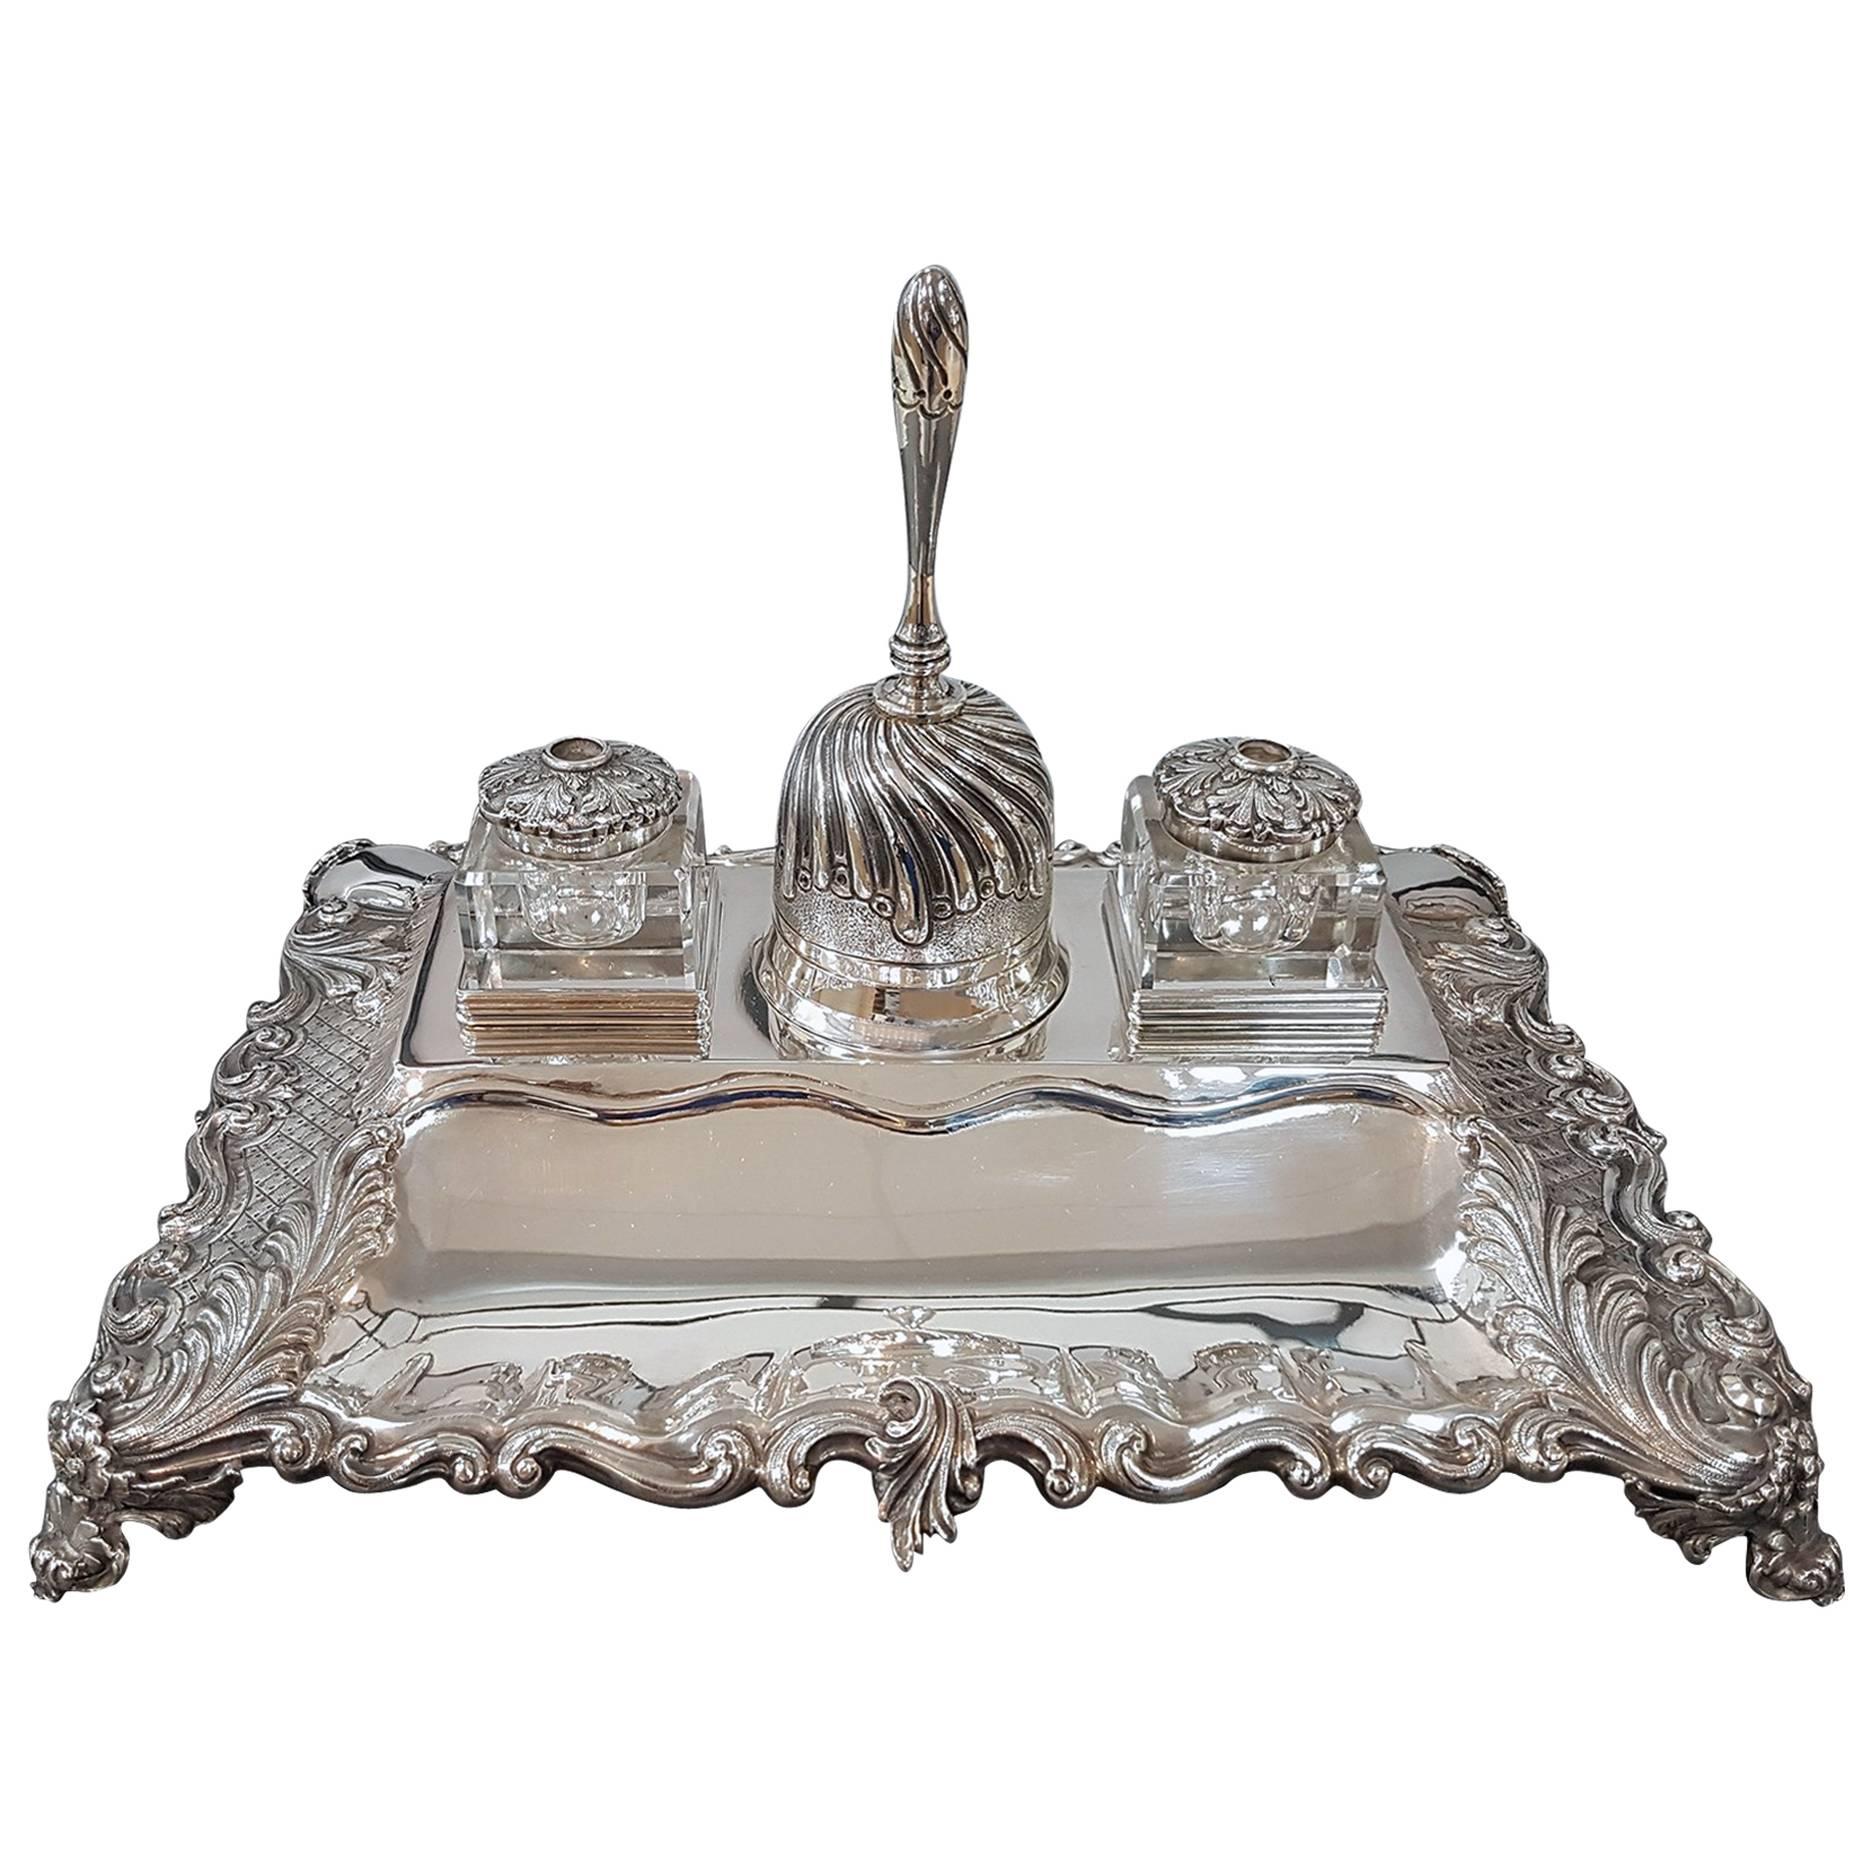 20th Century Italian Sterling Silver Inkstand, hHandicraft made in Italy For Sale